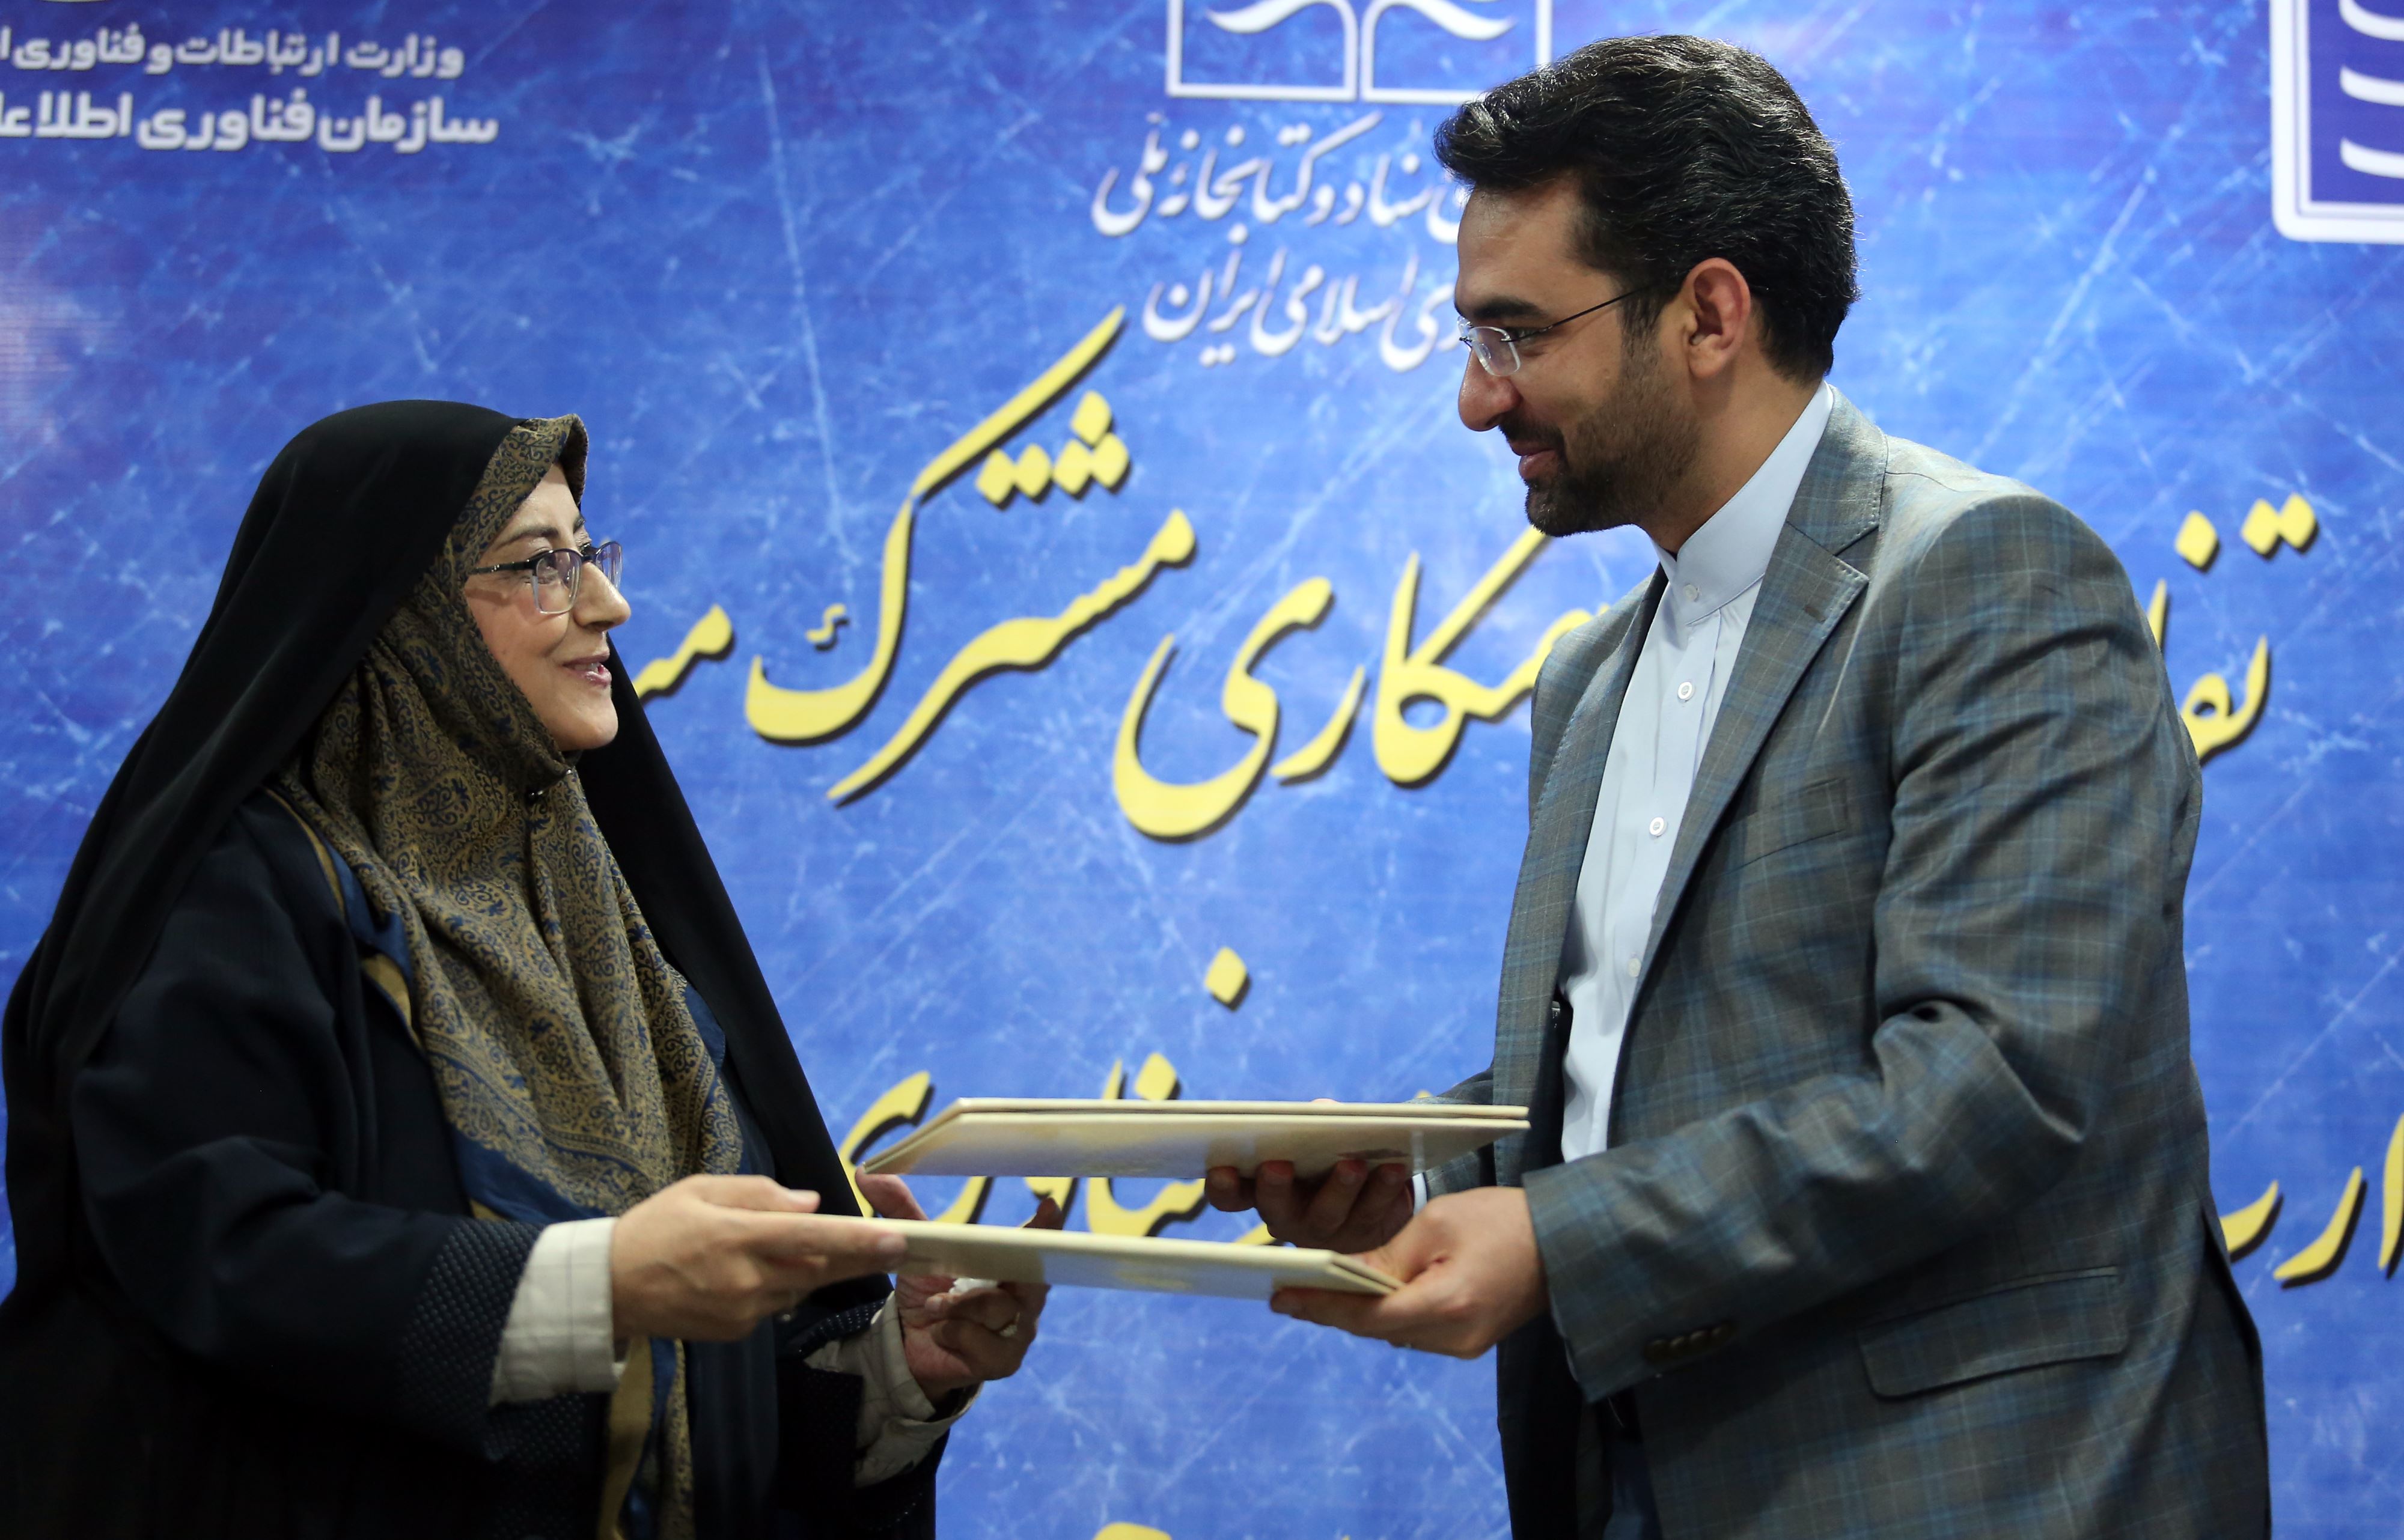 Tapping Blockchain Technology, Iran National Library Archives to Go Online